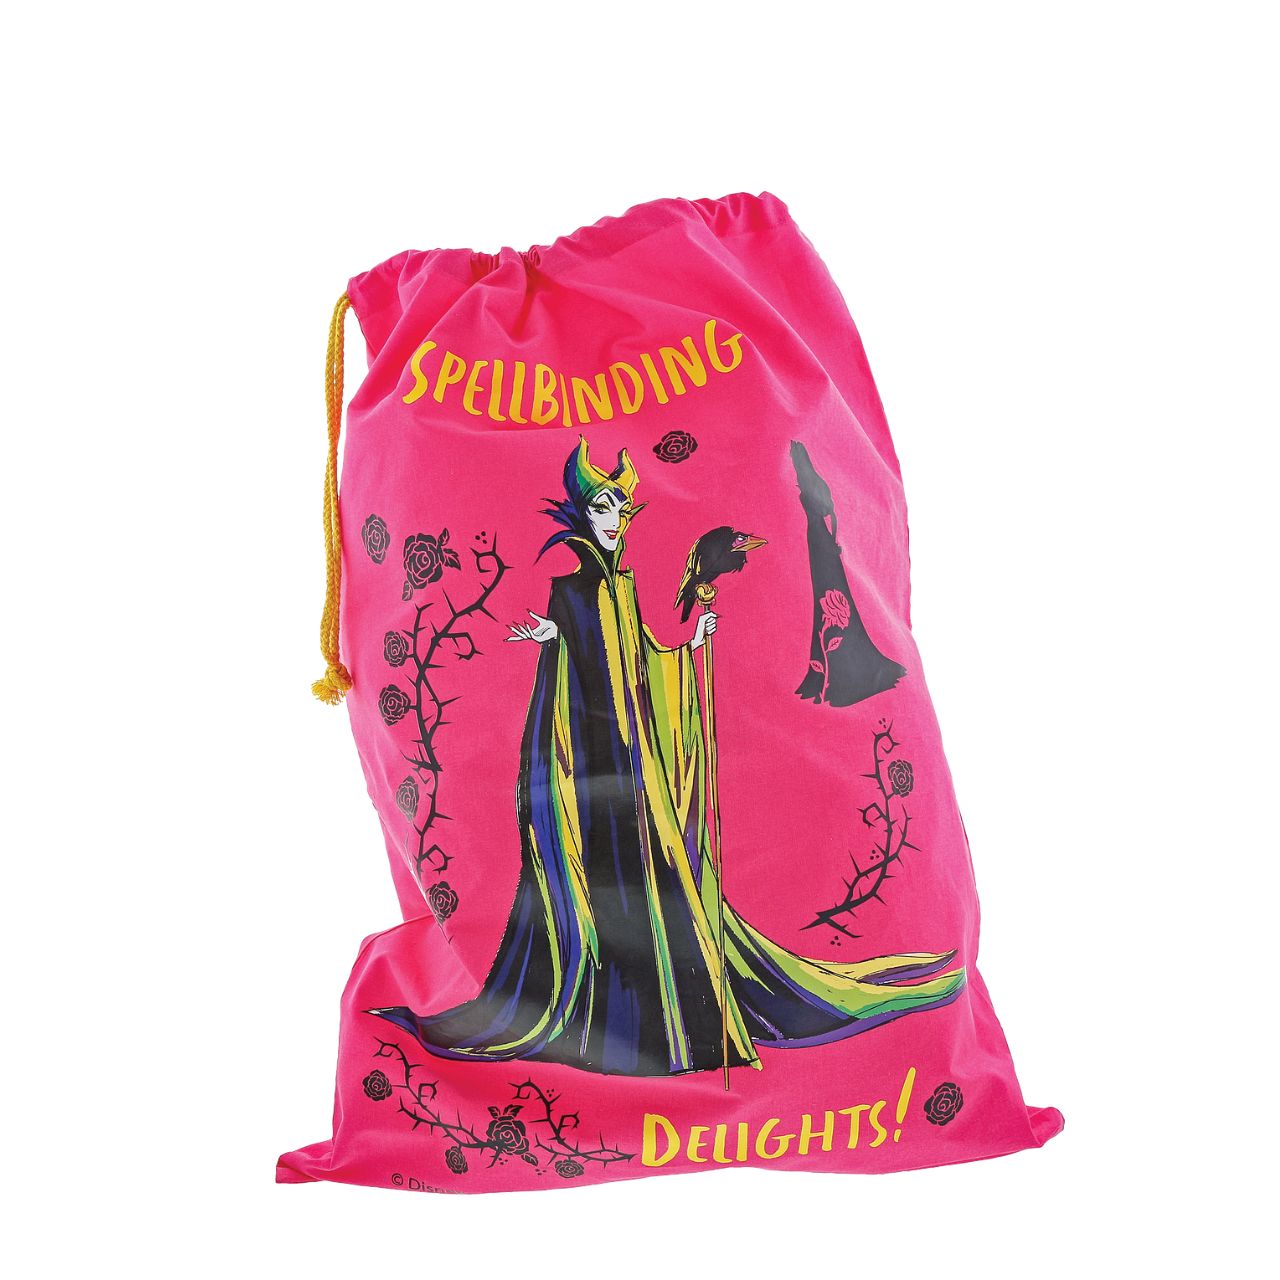 Disney Sleeping Beauty Spellbinding Delights Maleficent Sack  What spellbinding delights will Maleficent and Sleeping Beauty leave for you and your family this Christmas? This vibrant and villainous sack is perfect for sitting under any tree.